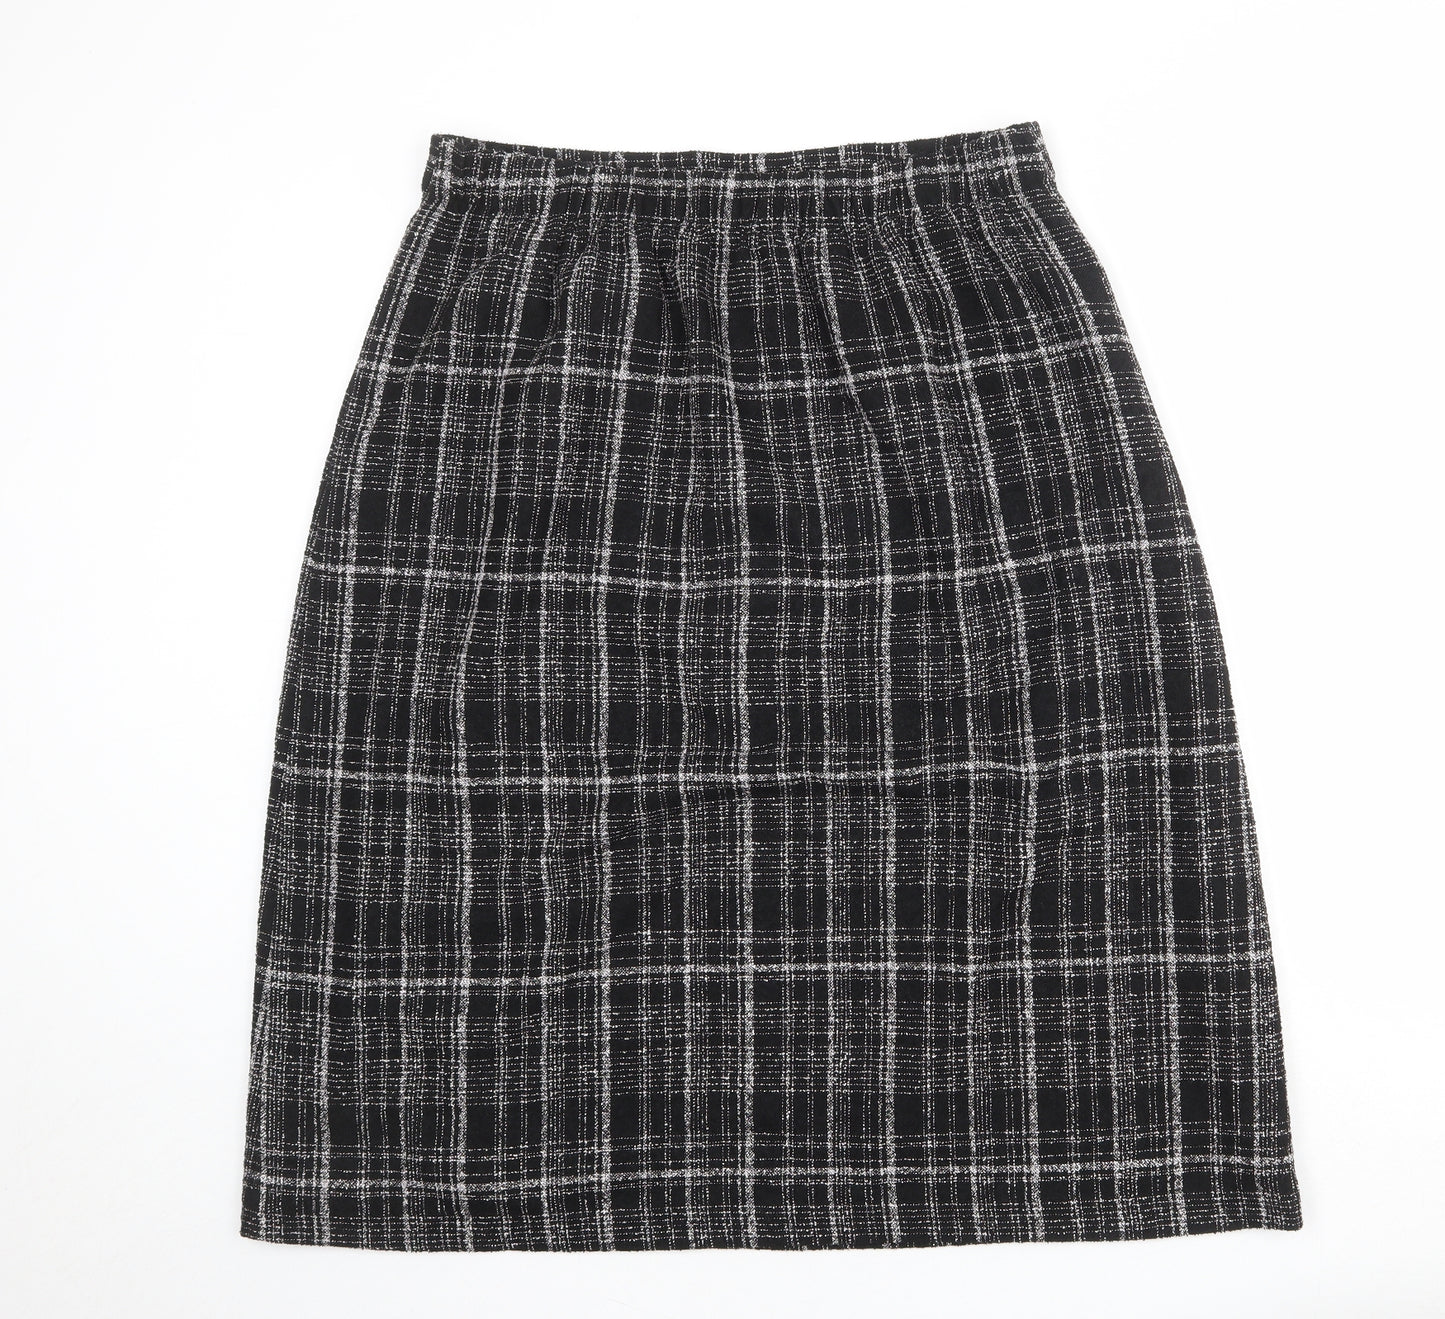 Classic Womens Black Plaid Polyester A-Line Skirt Size 16